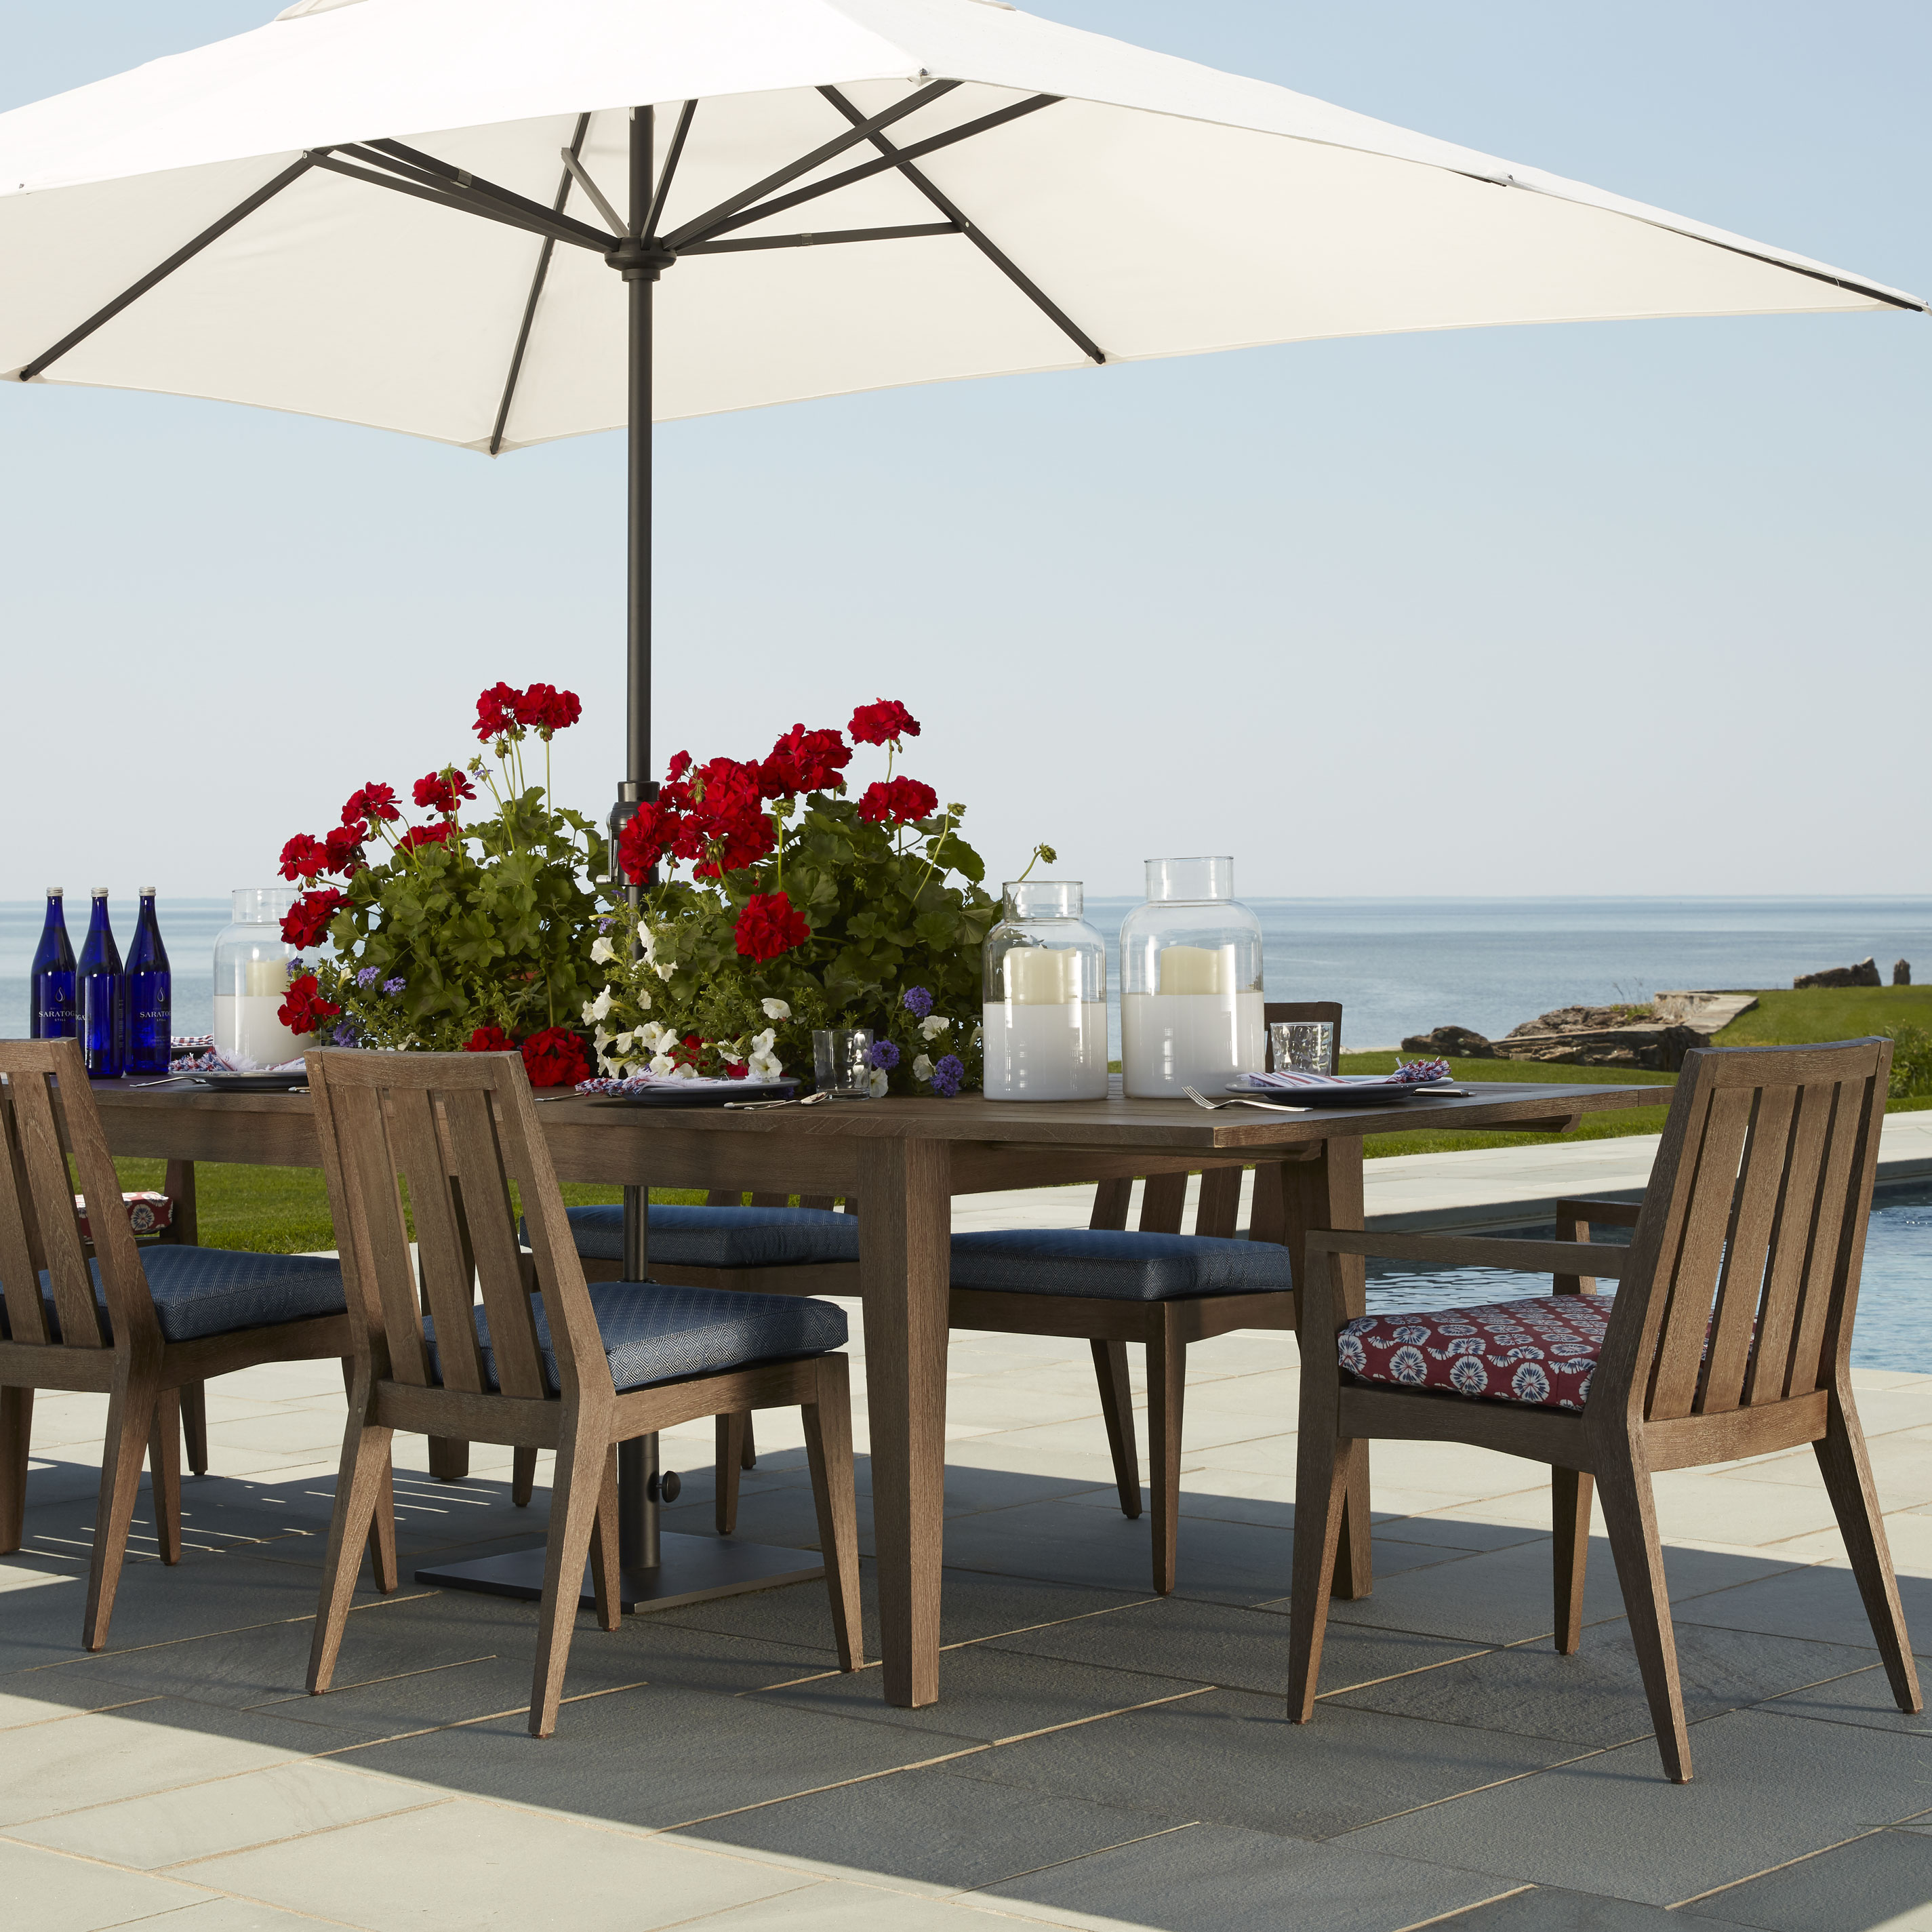 Outdoor Dining, Poolside to Seaside Tile